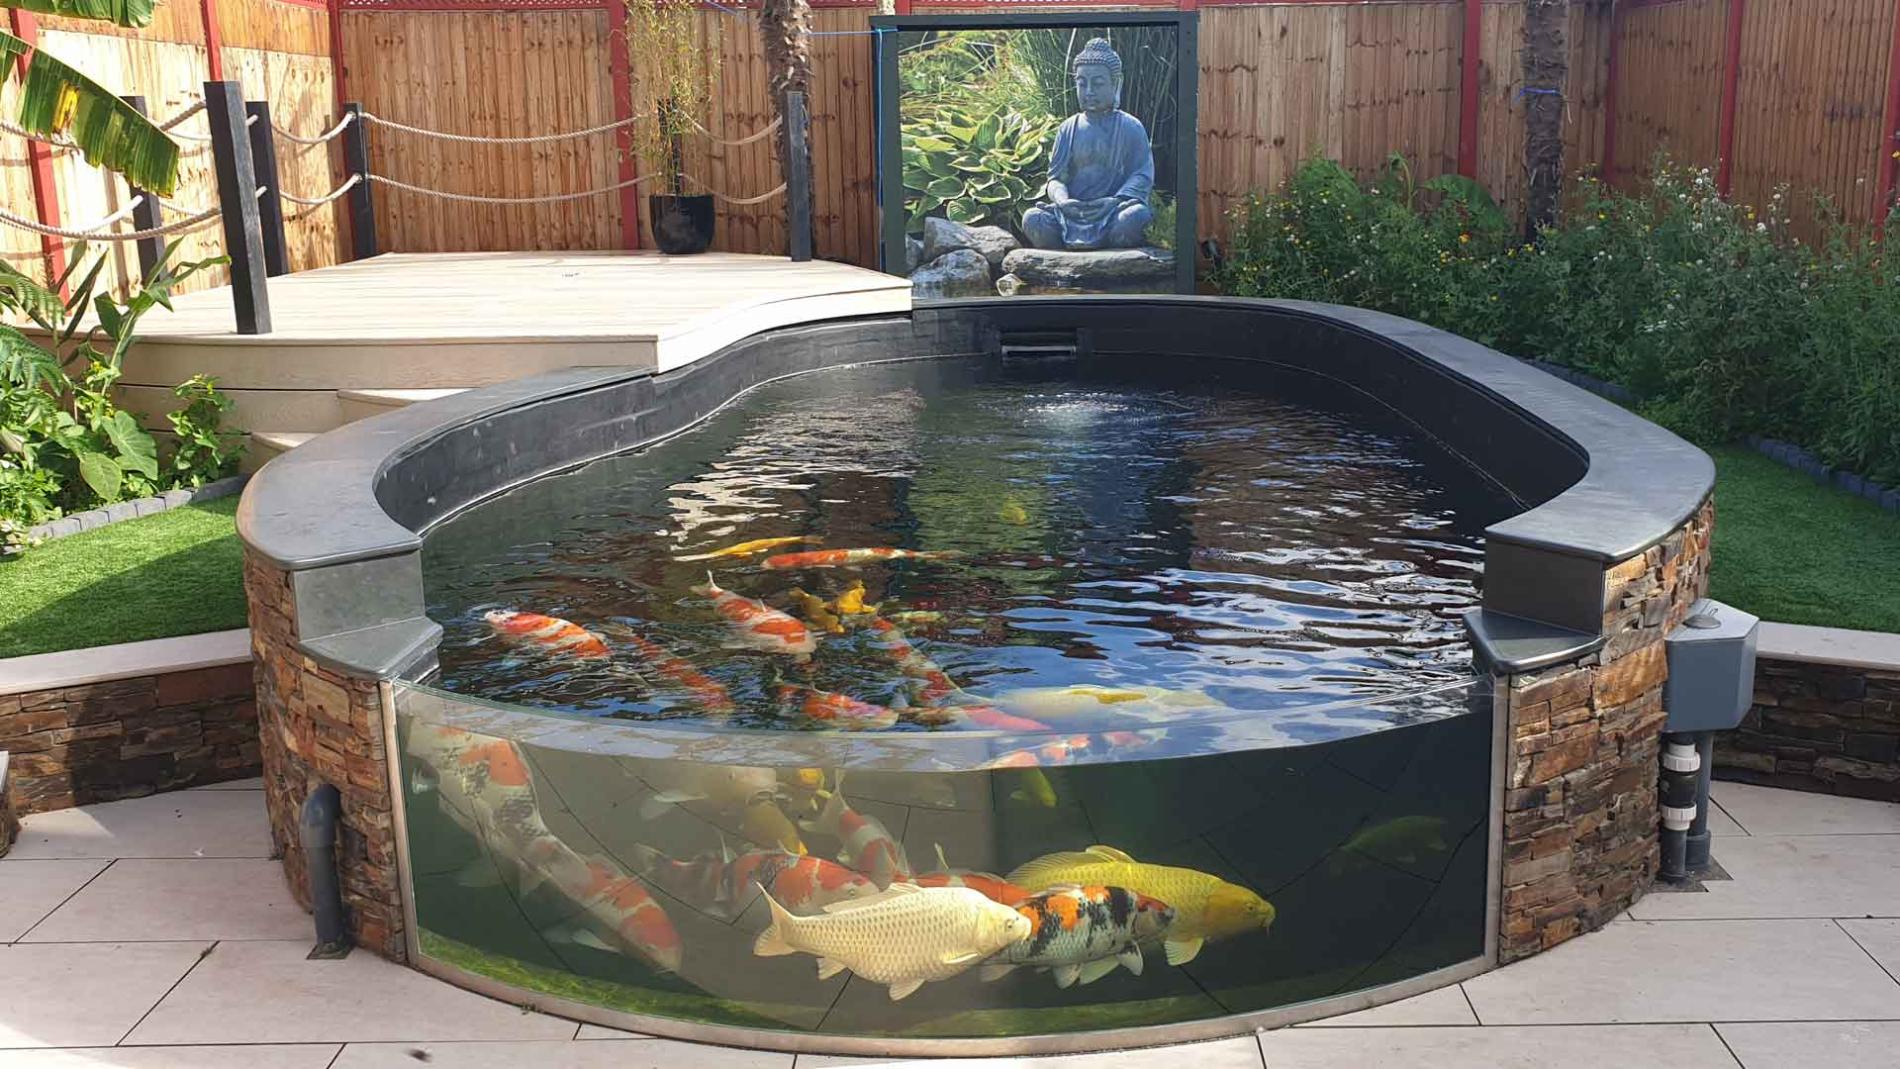 A Pond in a Garden with Fish on Display Through Glass Payne 